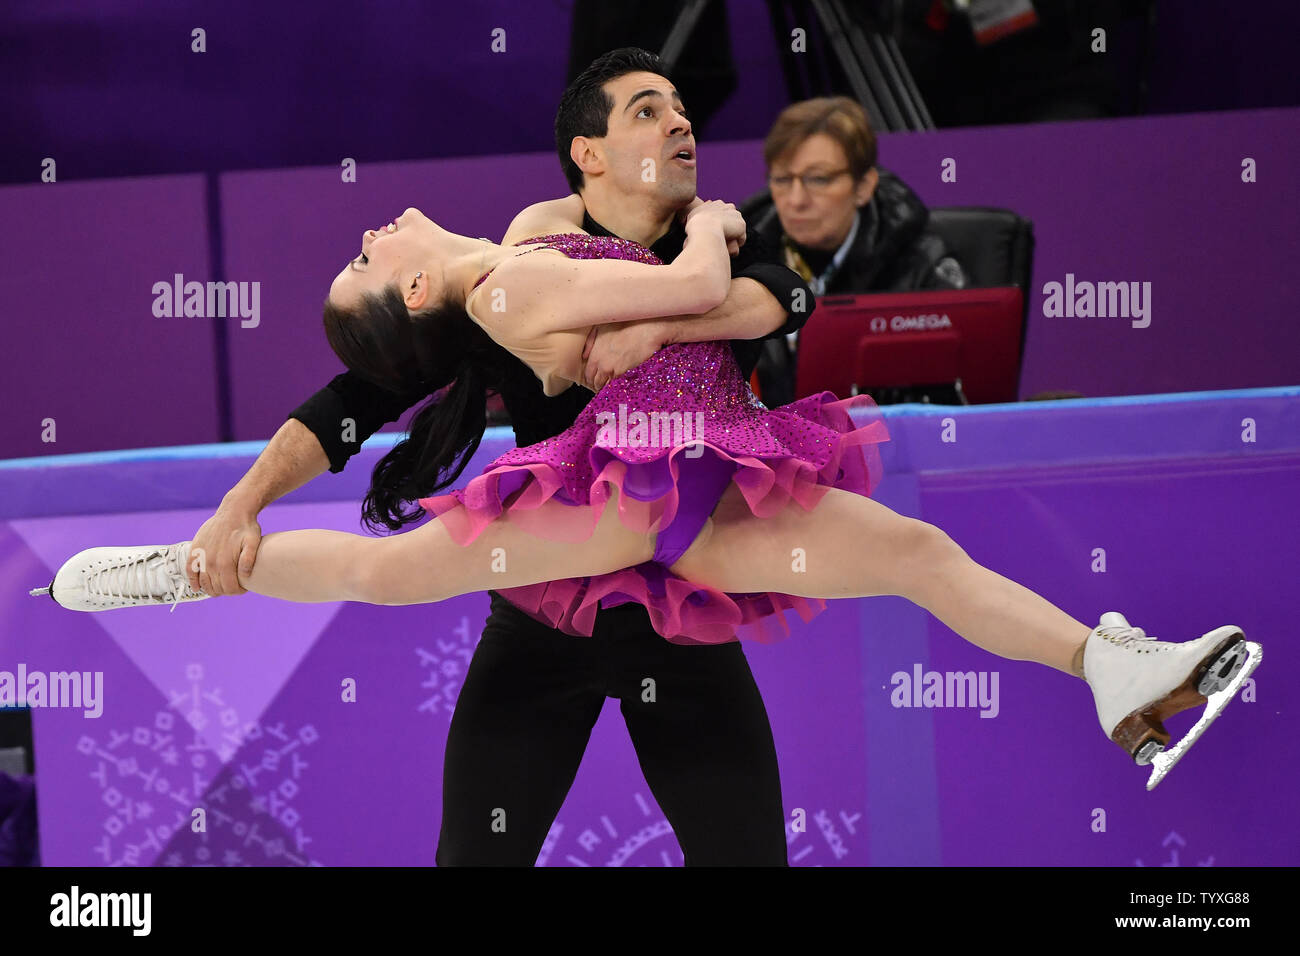 Anna cappellini luca lanotte italy hi-res stock photography and images -  Alamy